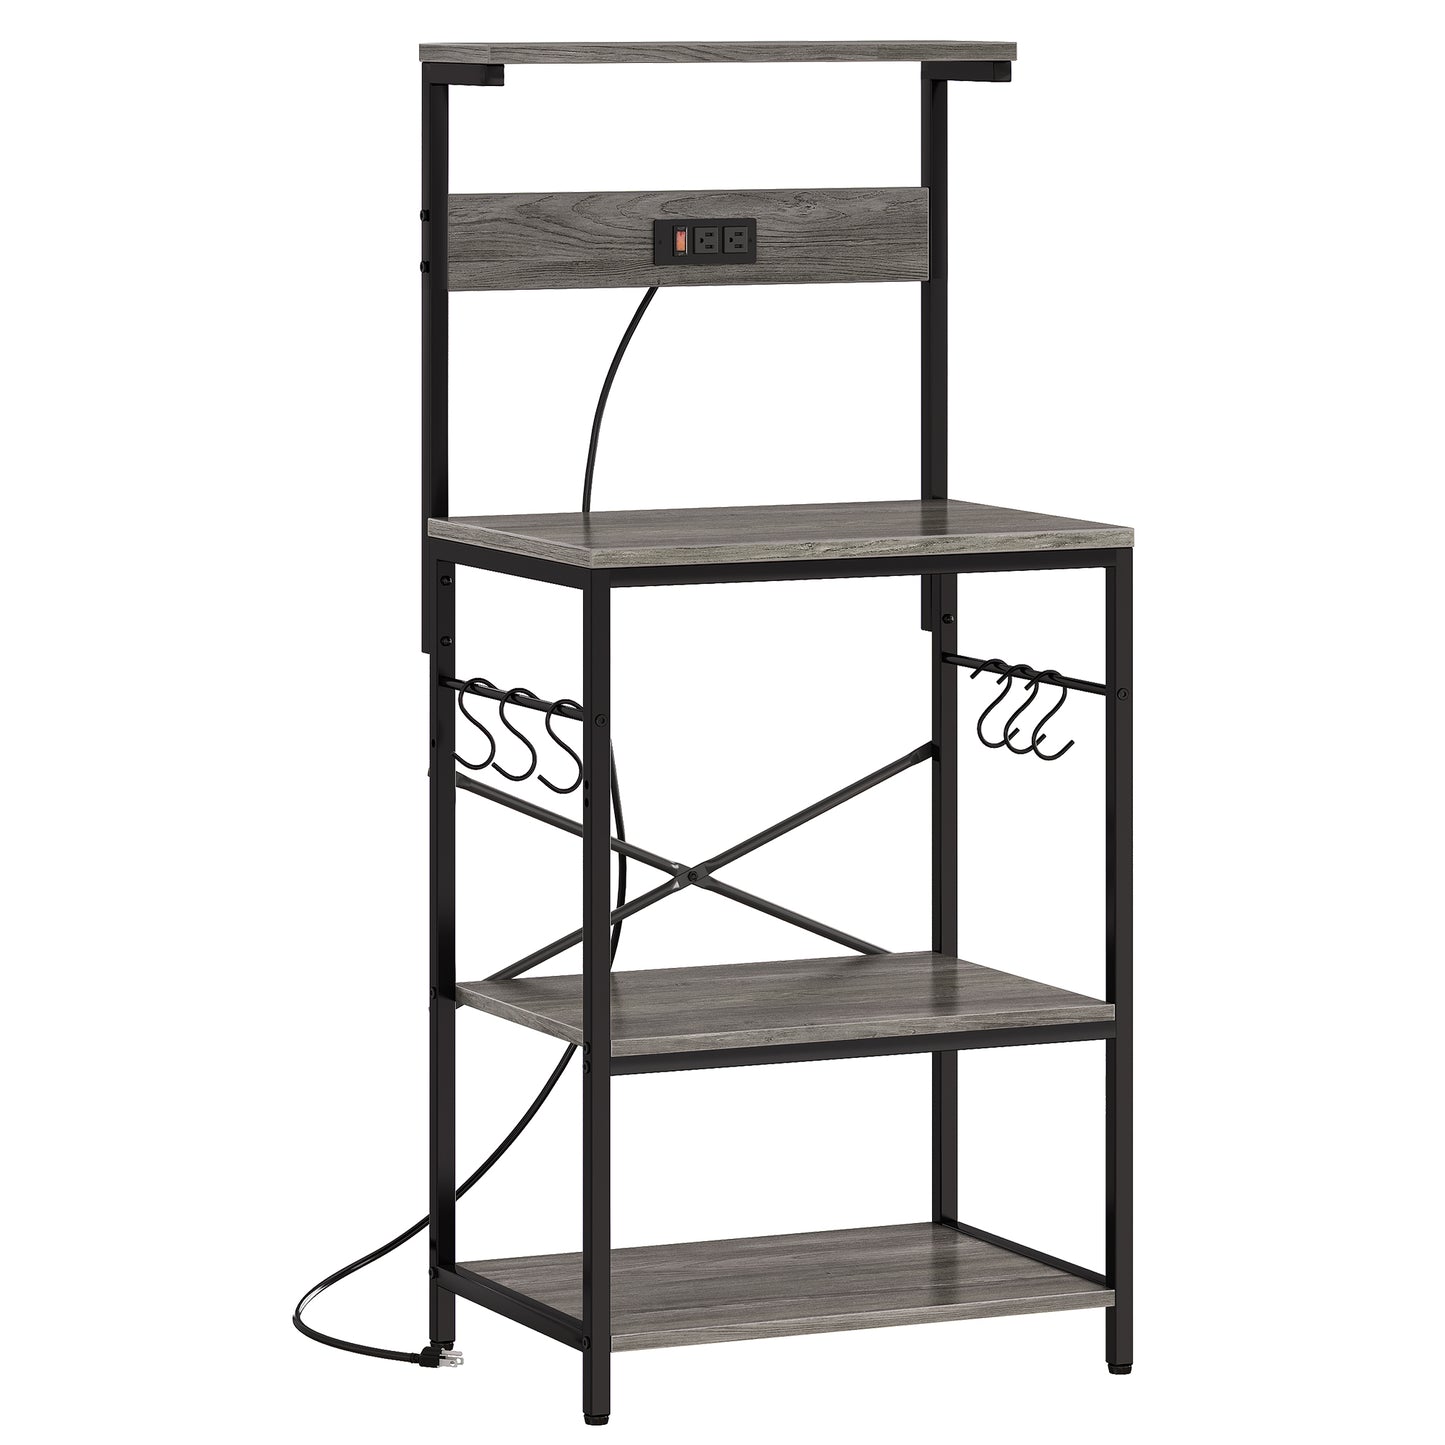 SUPERJARE Kitchen Bakers Rack with Power Outlet, Coffee Bar Table 4 Tiers, 6 S-shaped Hooks, Kitchen Storage Shelf Rack - Rustic Brown